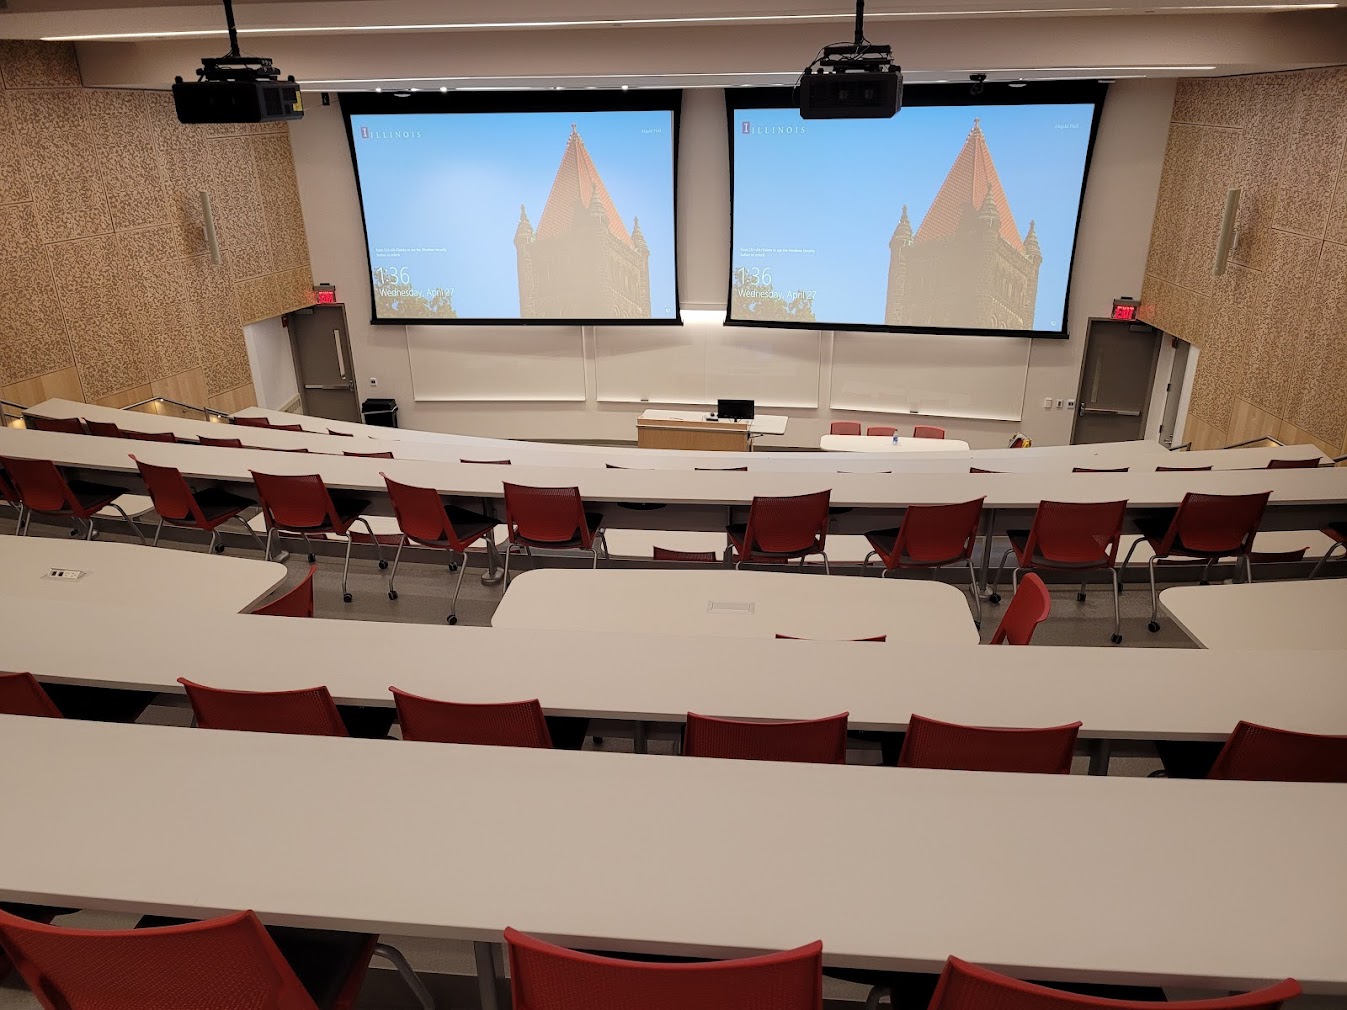 This is a view of the room, with student desks and tables, a front lectern, projection screen, and white boards.